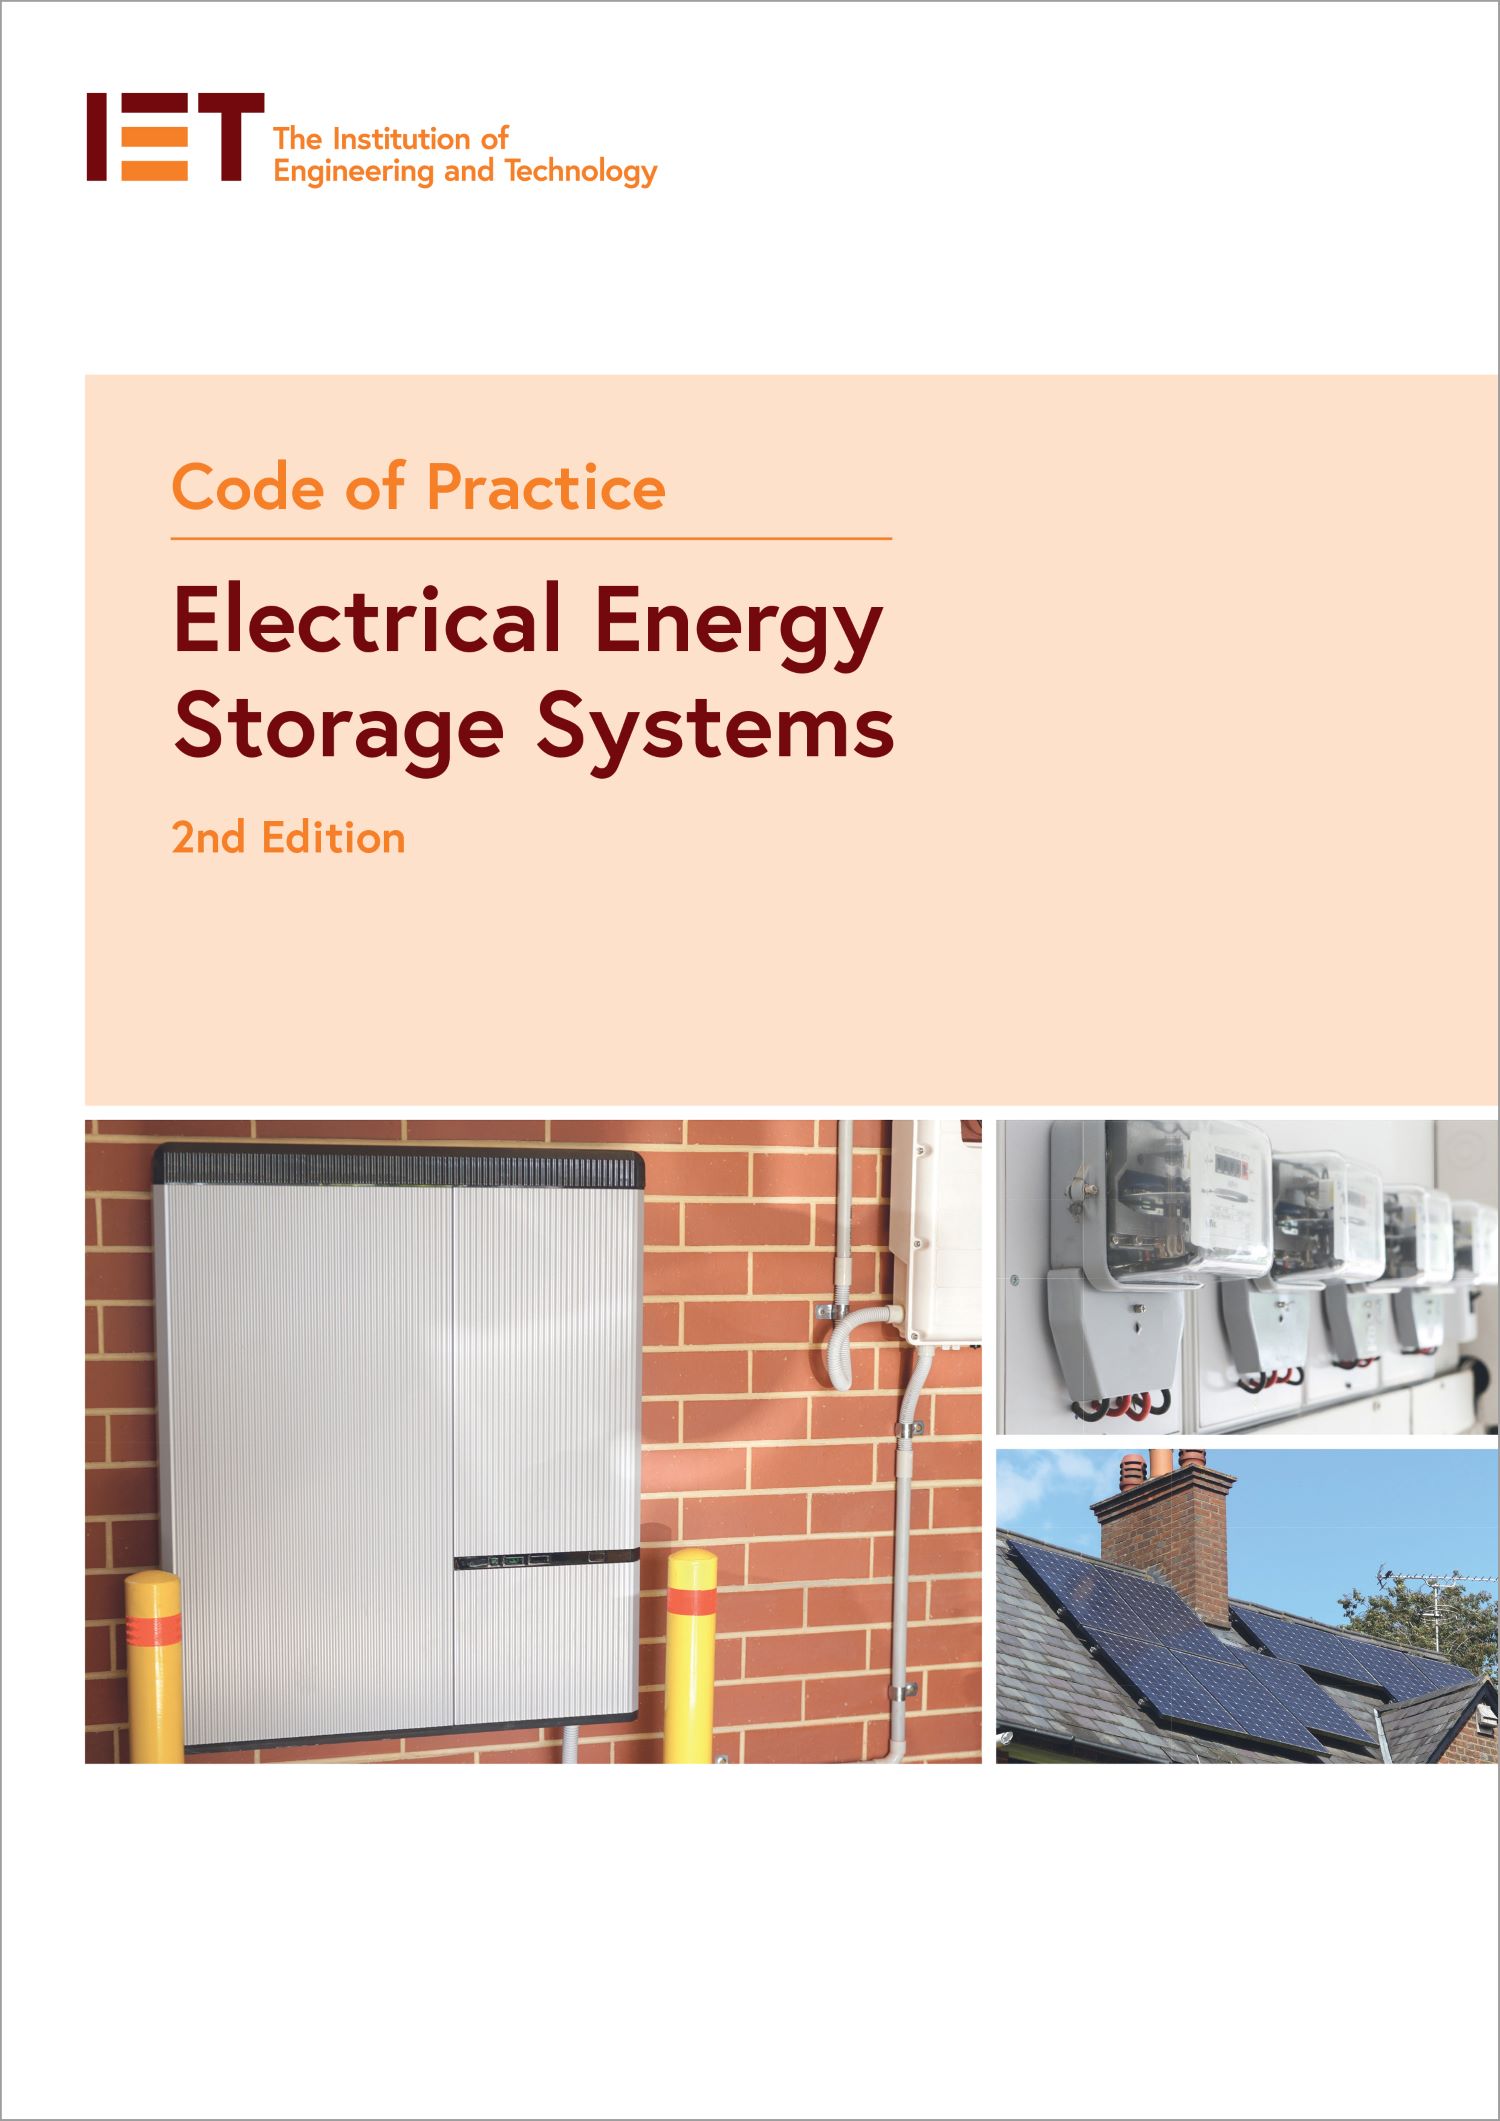 The IET Shop Code of Practice for Electrical Energy Storage Systems